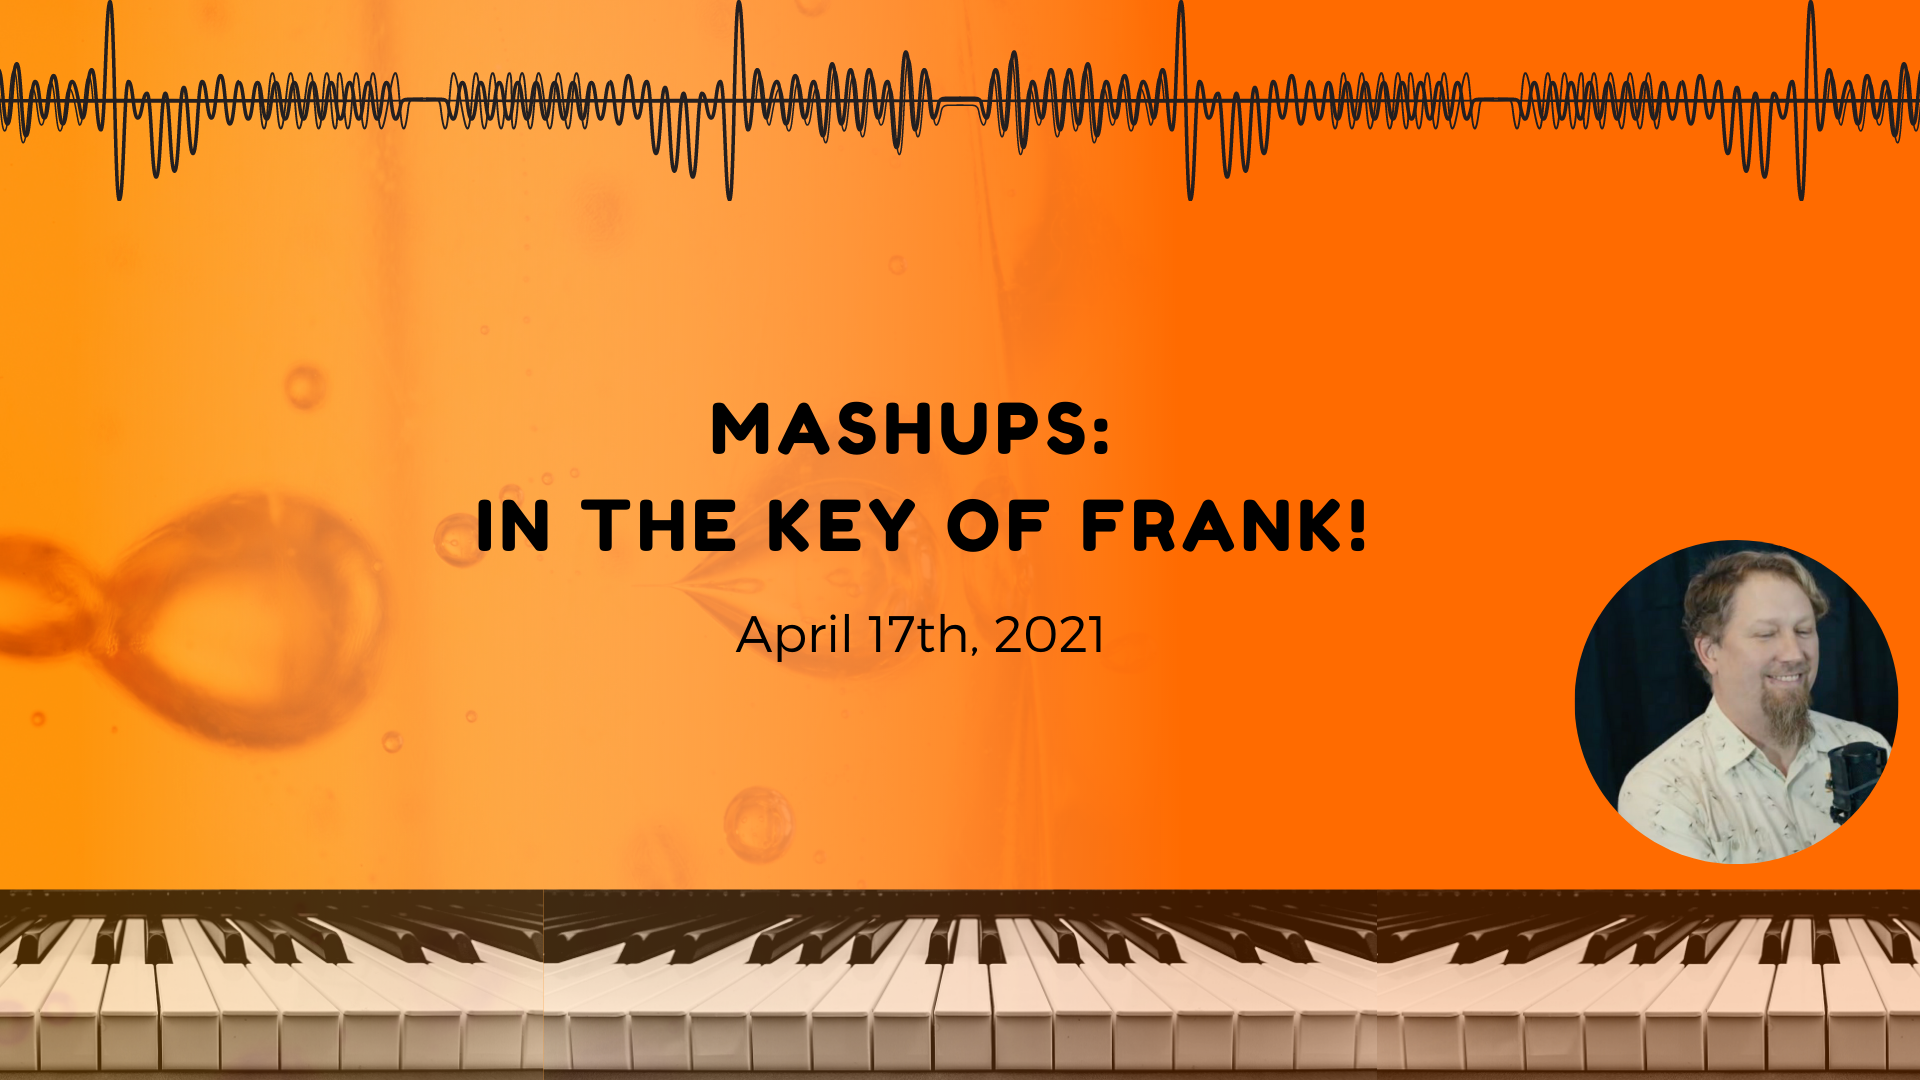 Mashups: In the Key of Frank